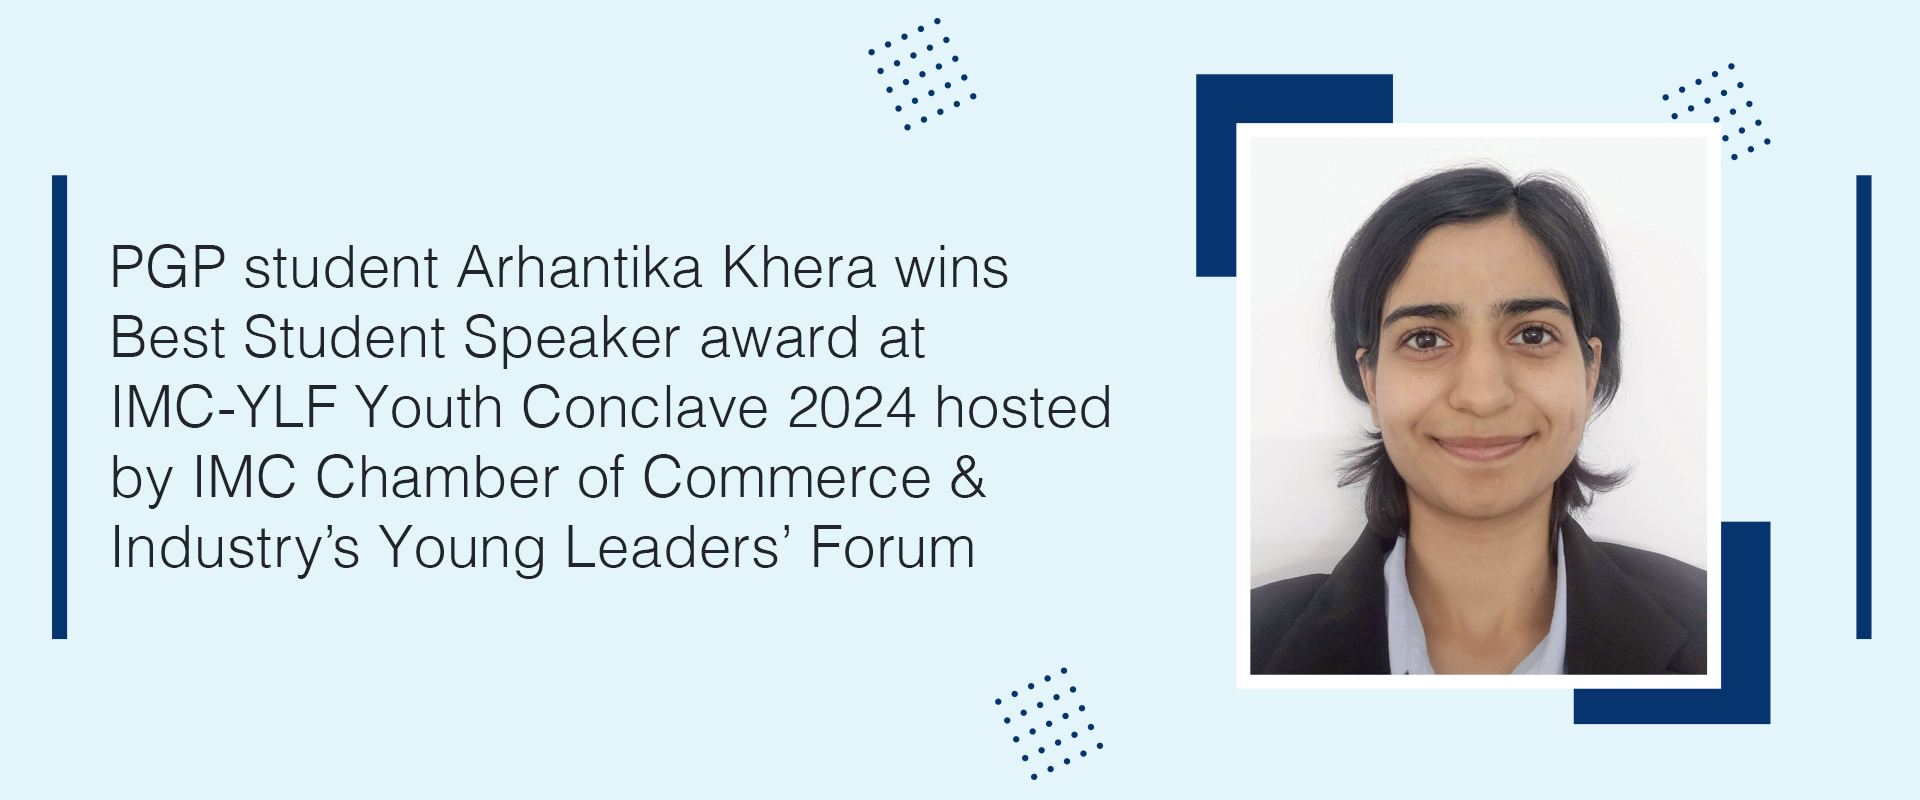 PGP student Arhantika Khera wins Best Student Speaker award at IMC-YLF Youth Conclave 2024 hosted by IMC Chamber of Commerce & Industry’s Young Leaders’ Forum 